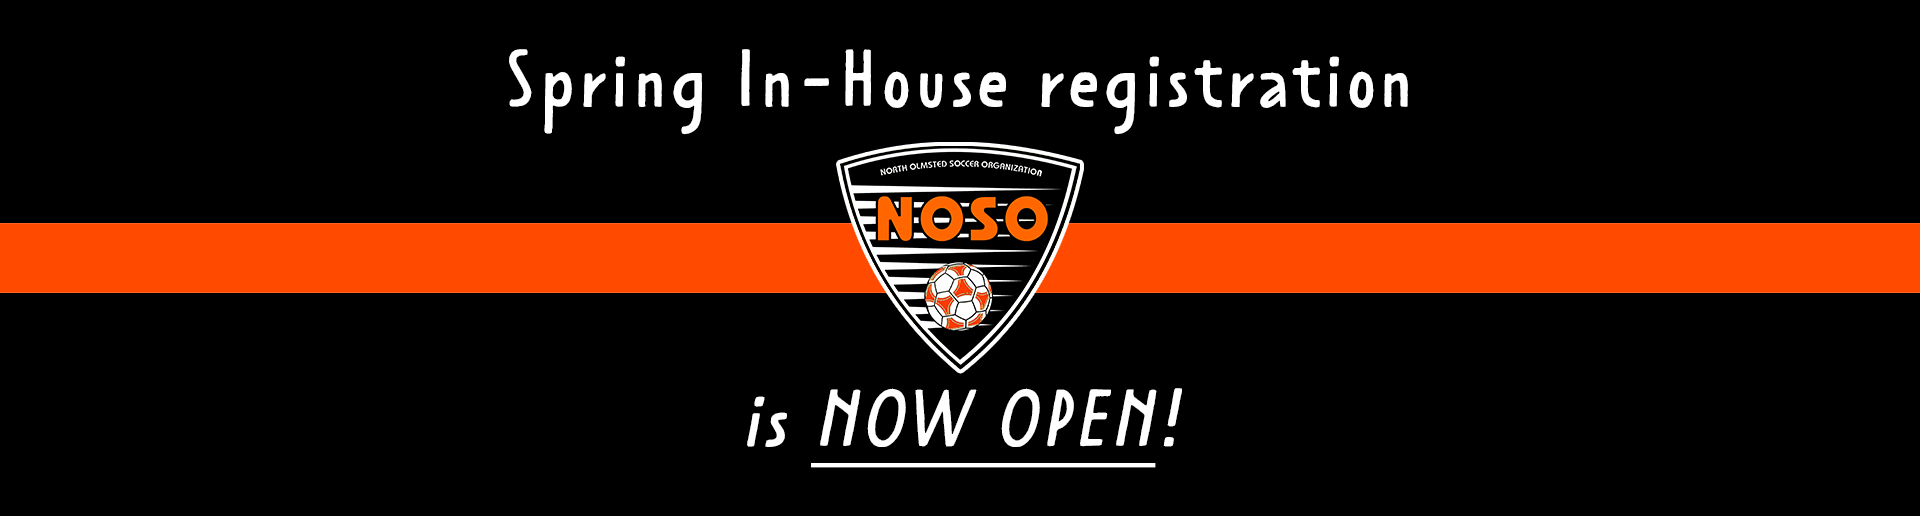 Spring In-House Registration NOW OPEN